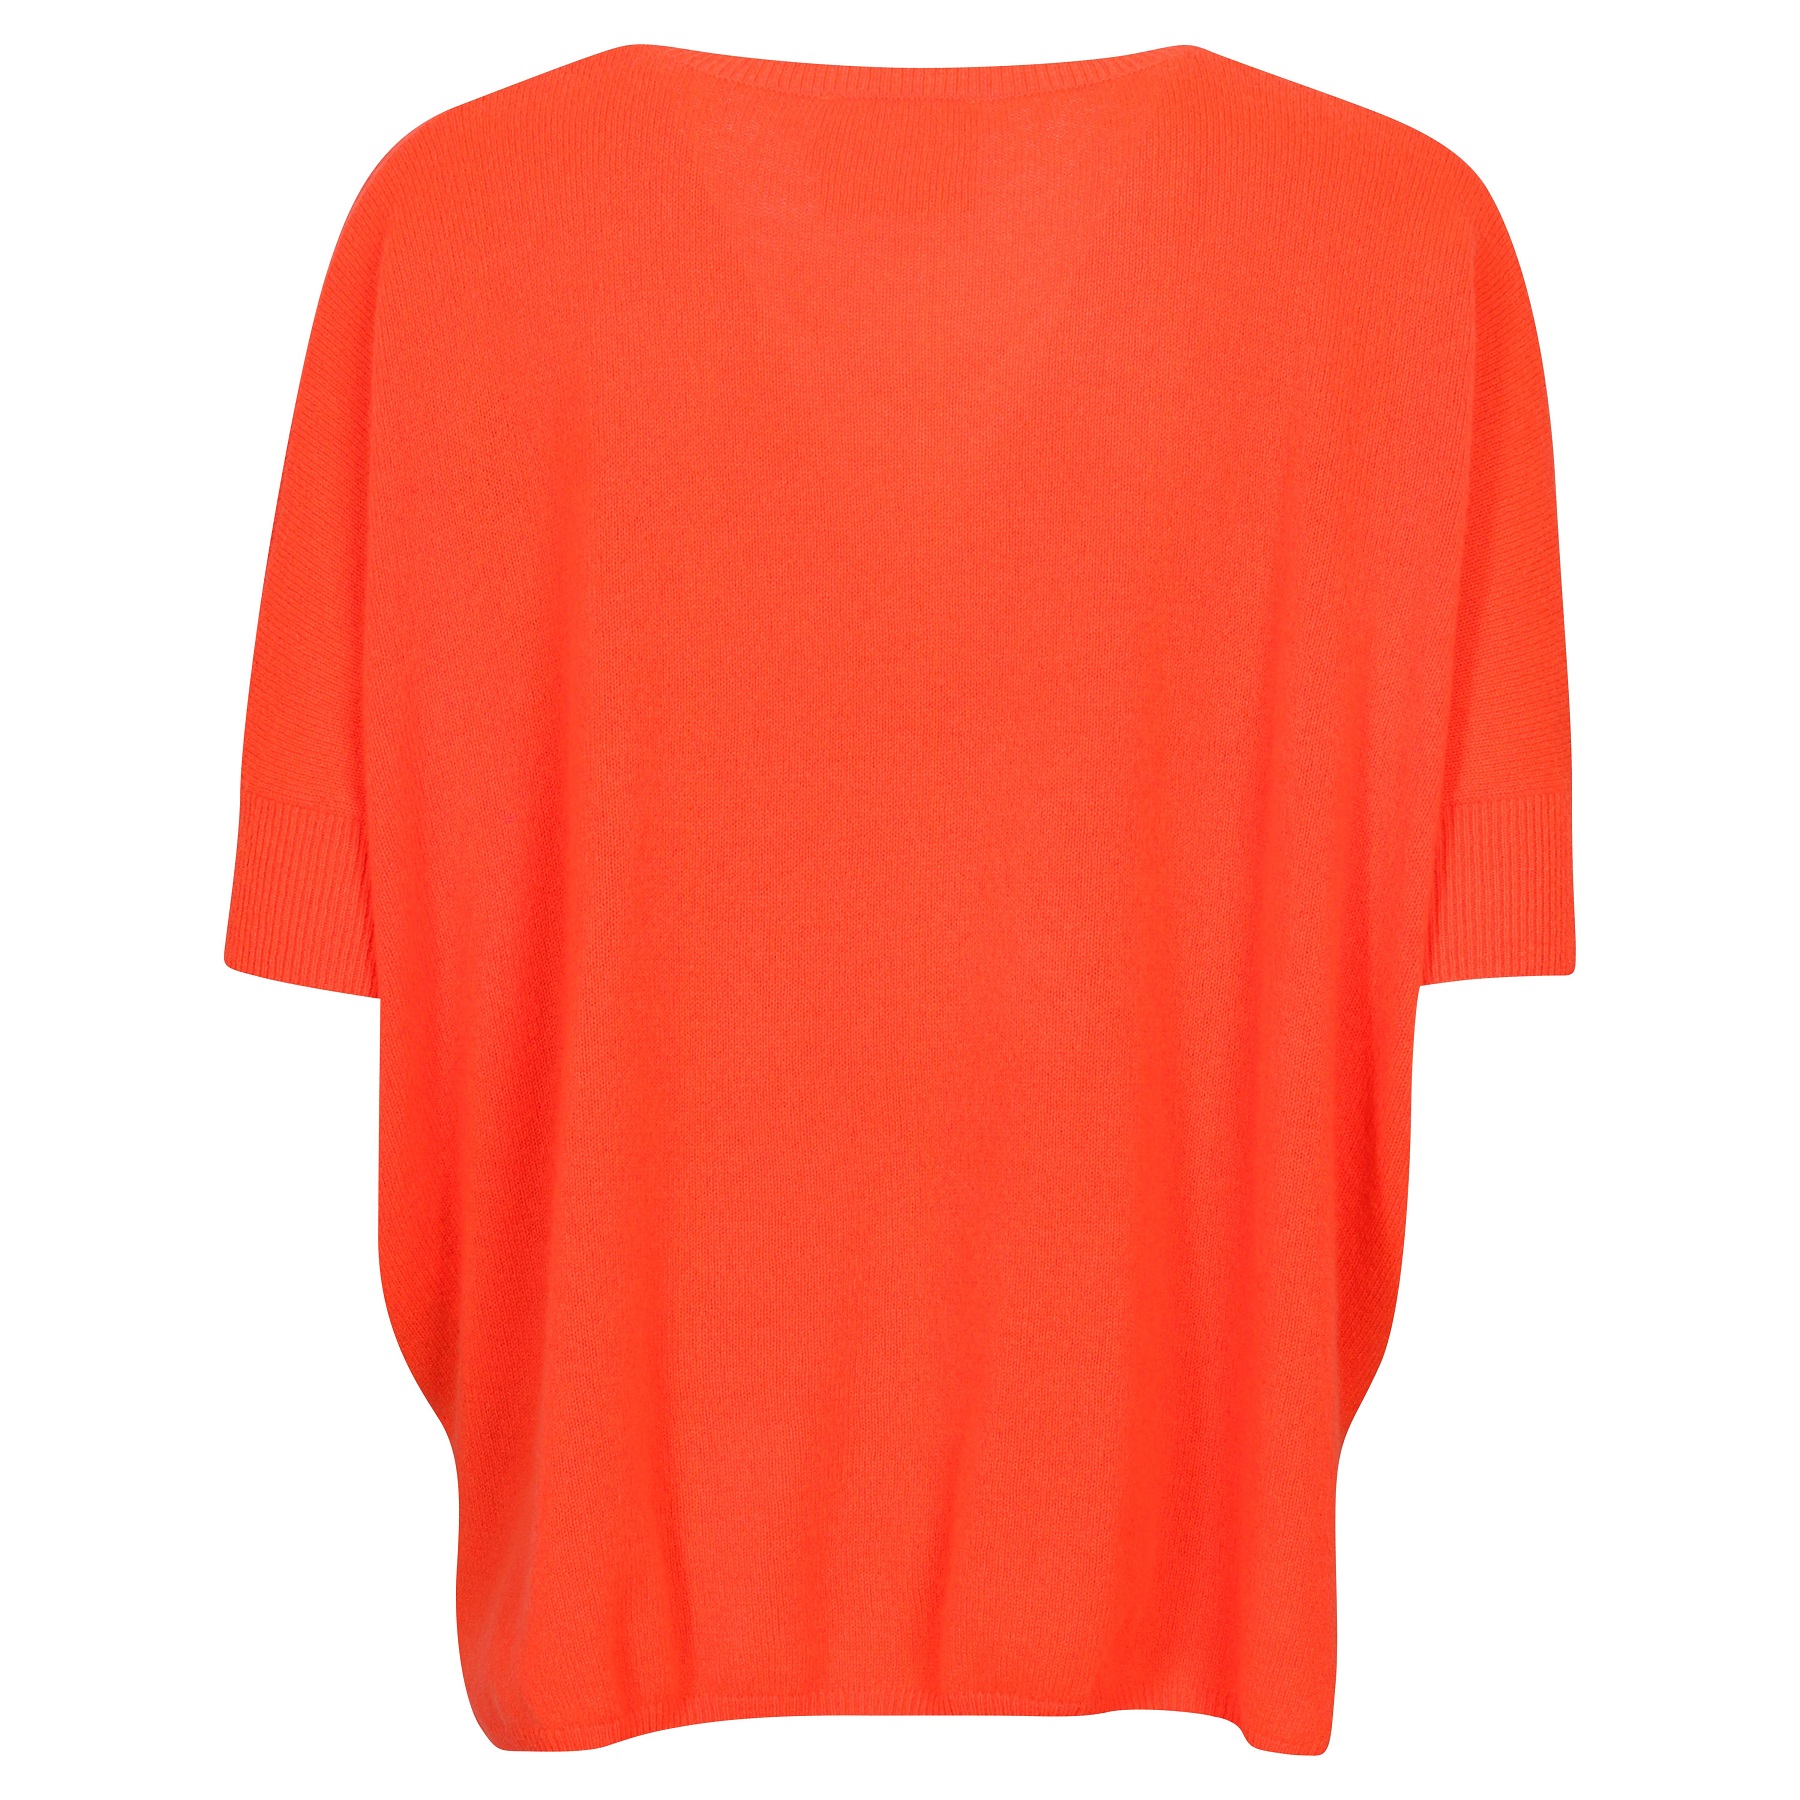 Absolut Cashmere Poncho Kate in Corail Fluo M